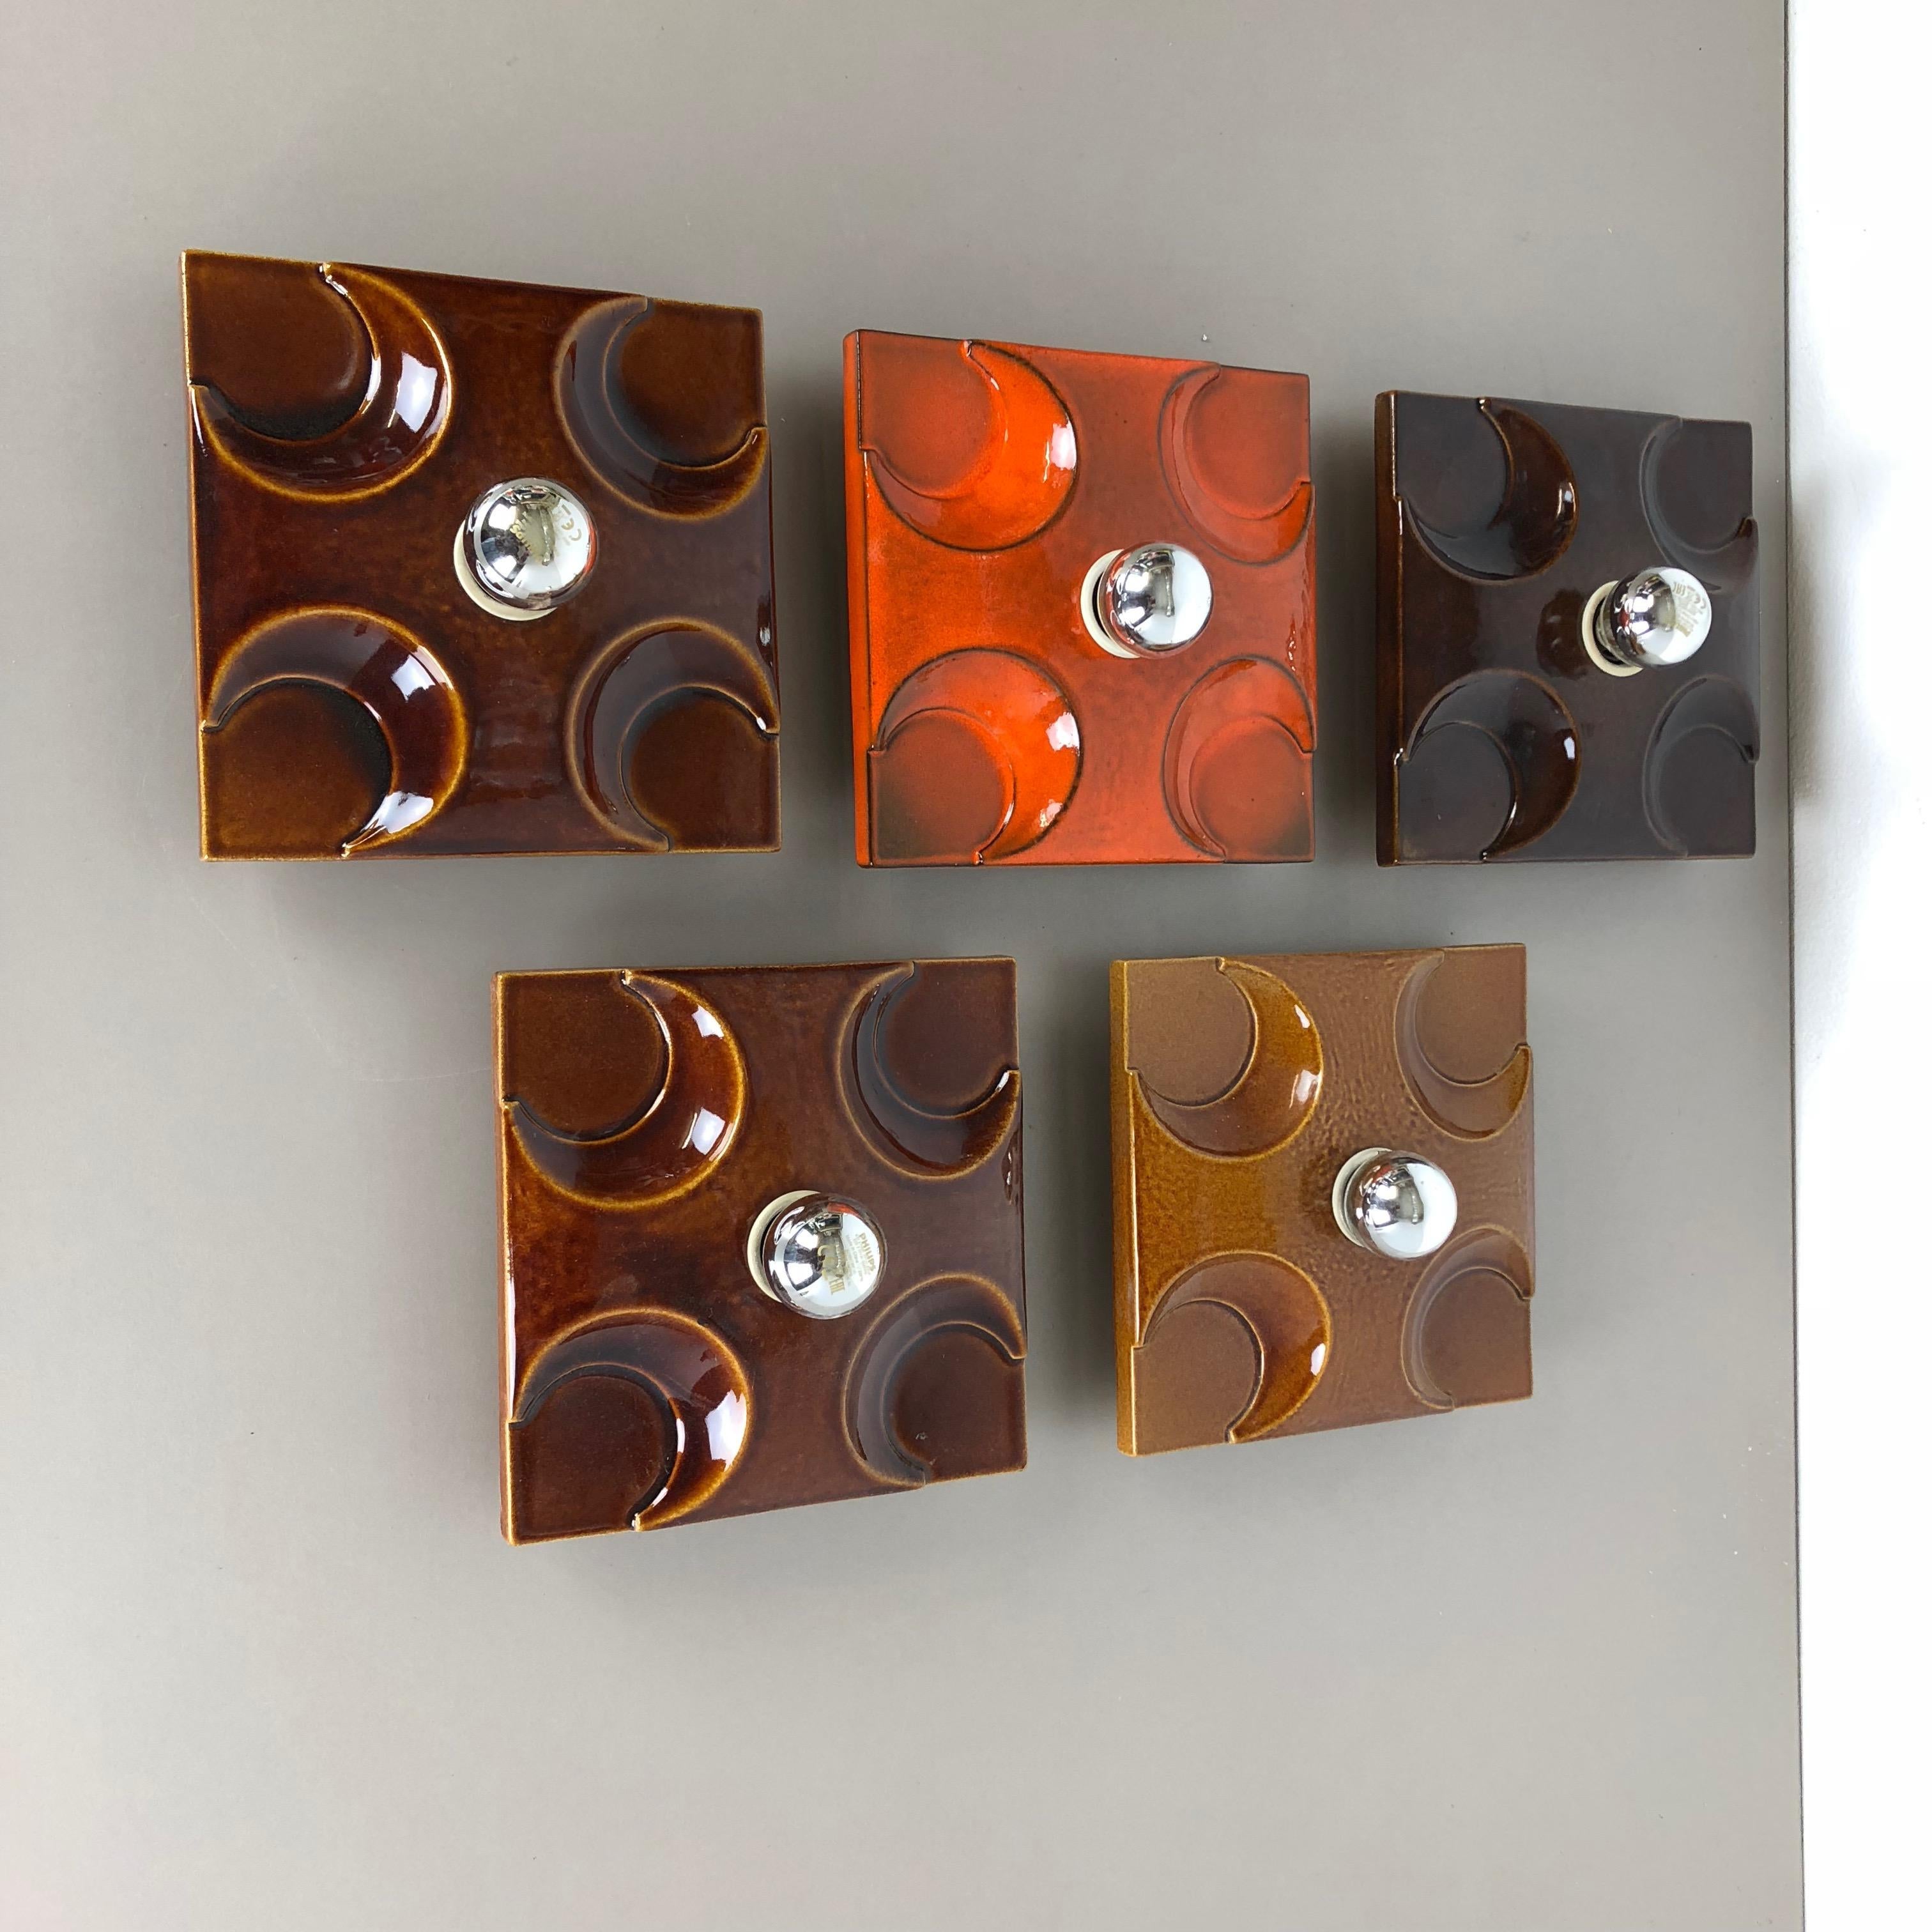 Article:

Wall light sconce set of five.


Producer:

Pan ceramic, Germany.



Origin:

Germany.



Age:

1970s.





Original 1960s modernist German wall light made of ceramic with an abstract pattern. This super rare set